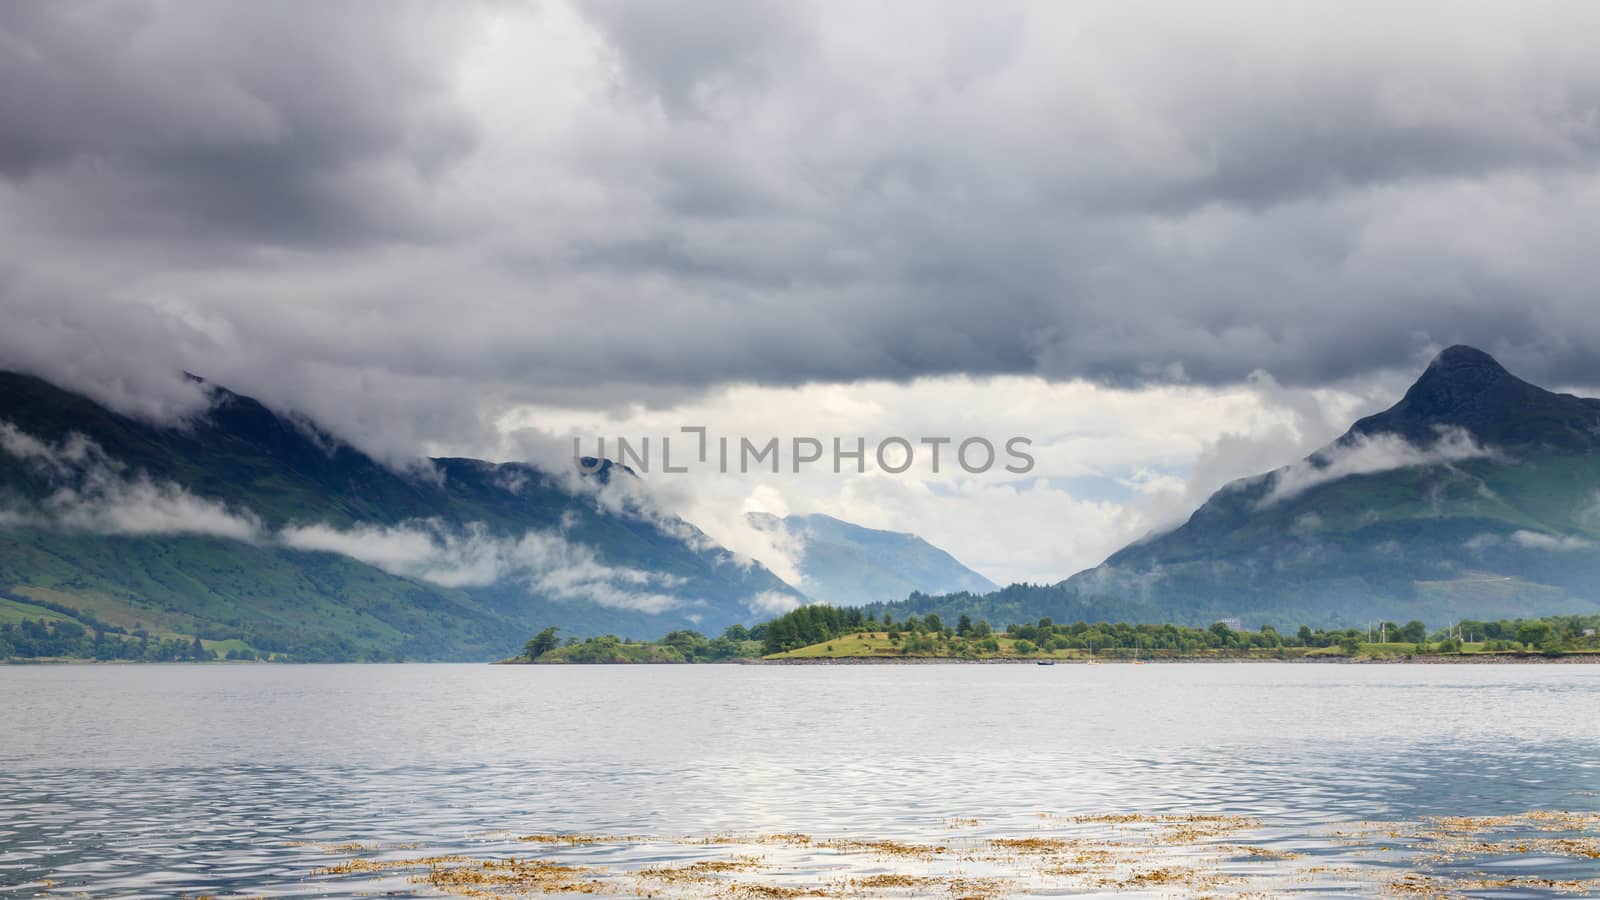 The view across Loch Leven to the Pap of Glencoe in the Scottish highlands.  Loch Leven is a sea loch on the west coast of Scotland.